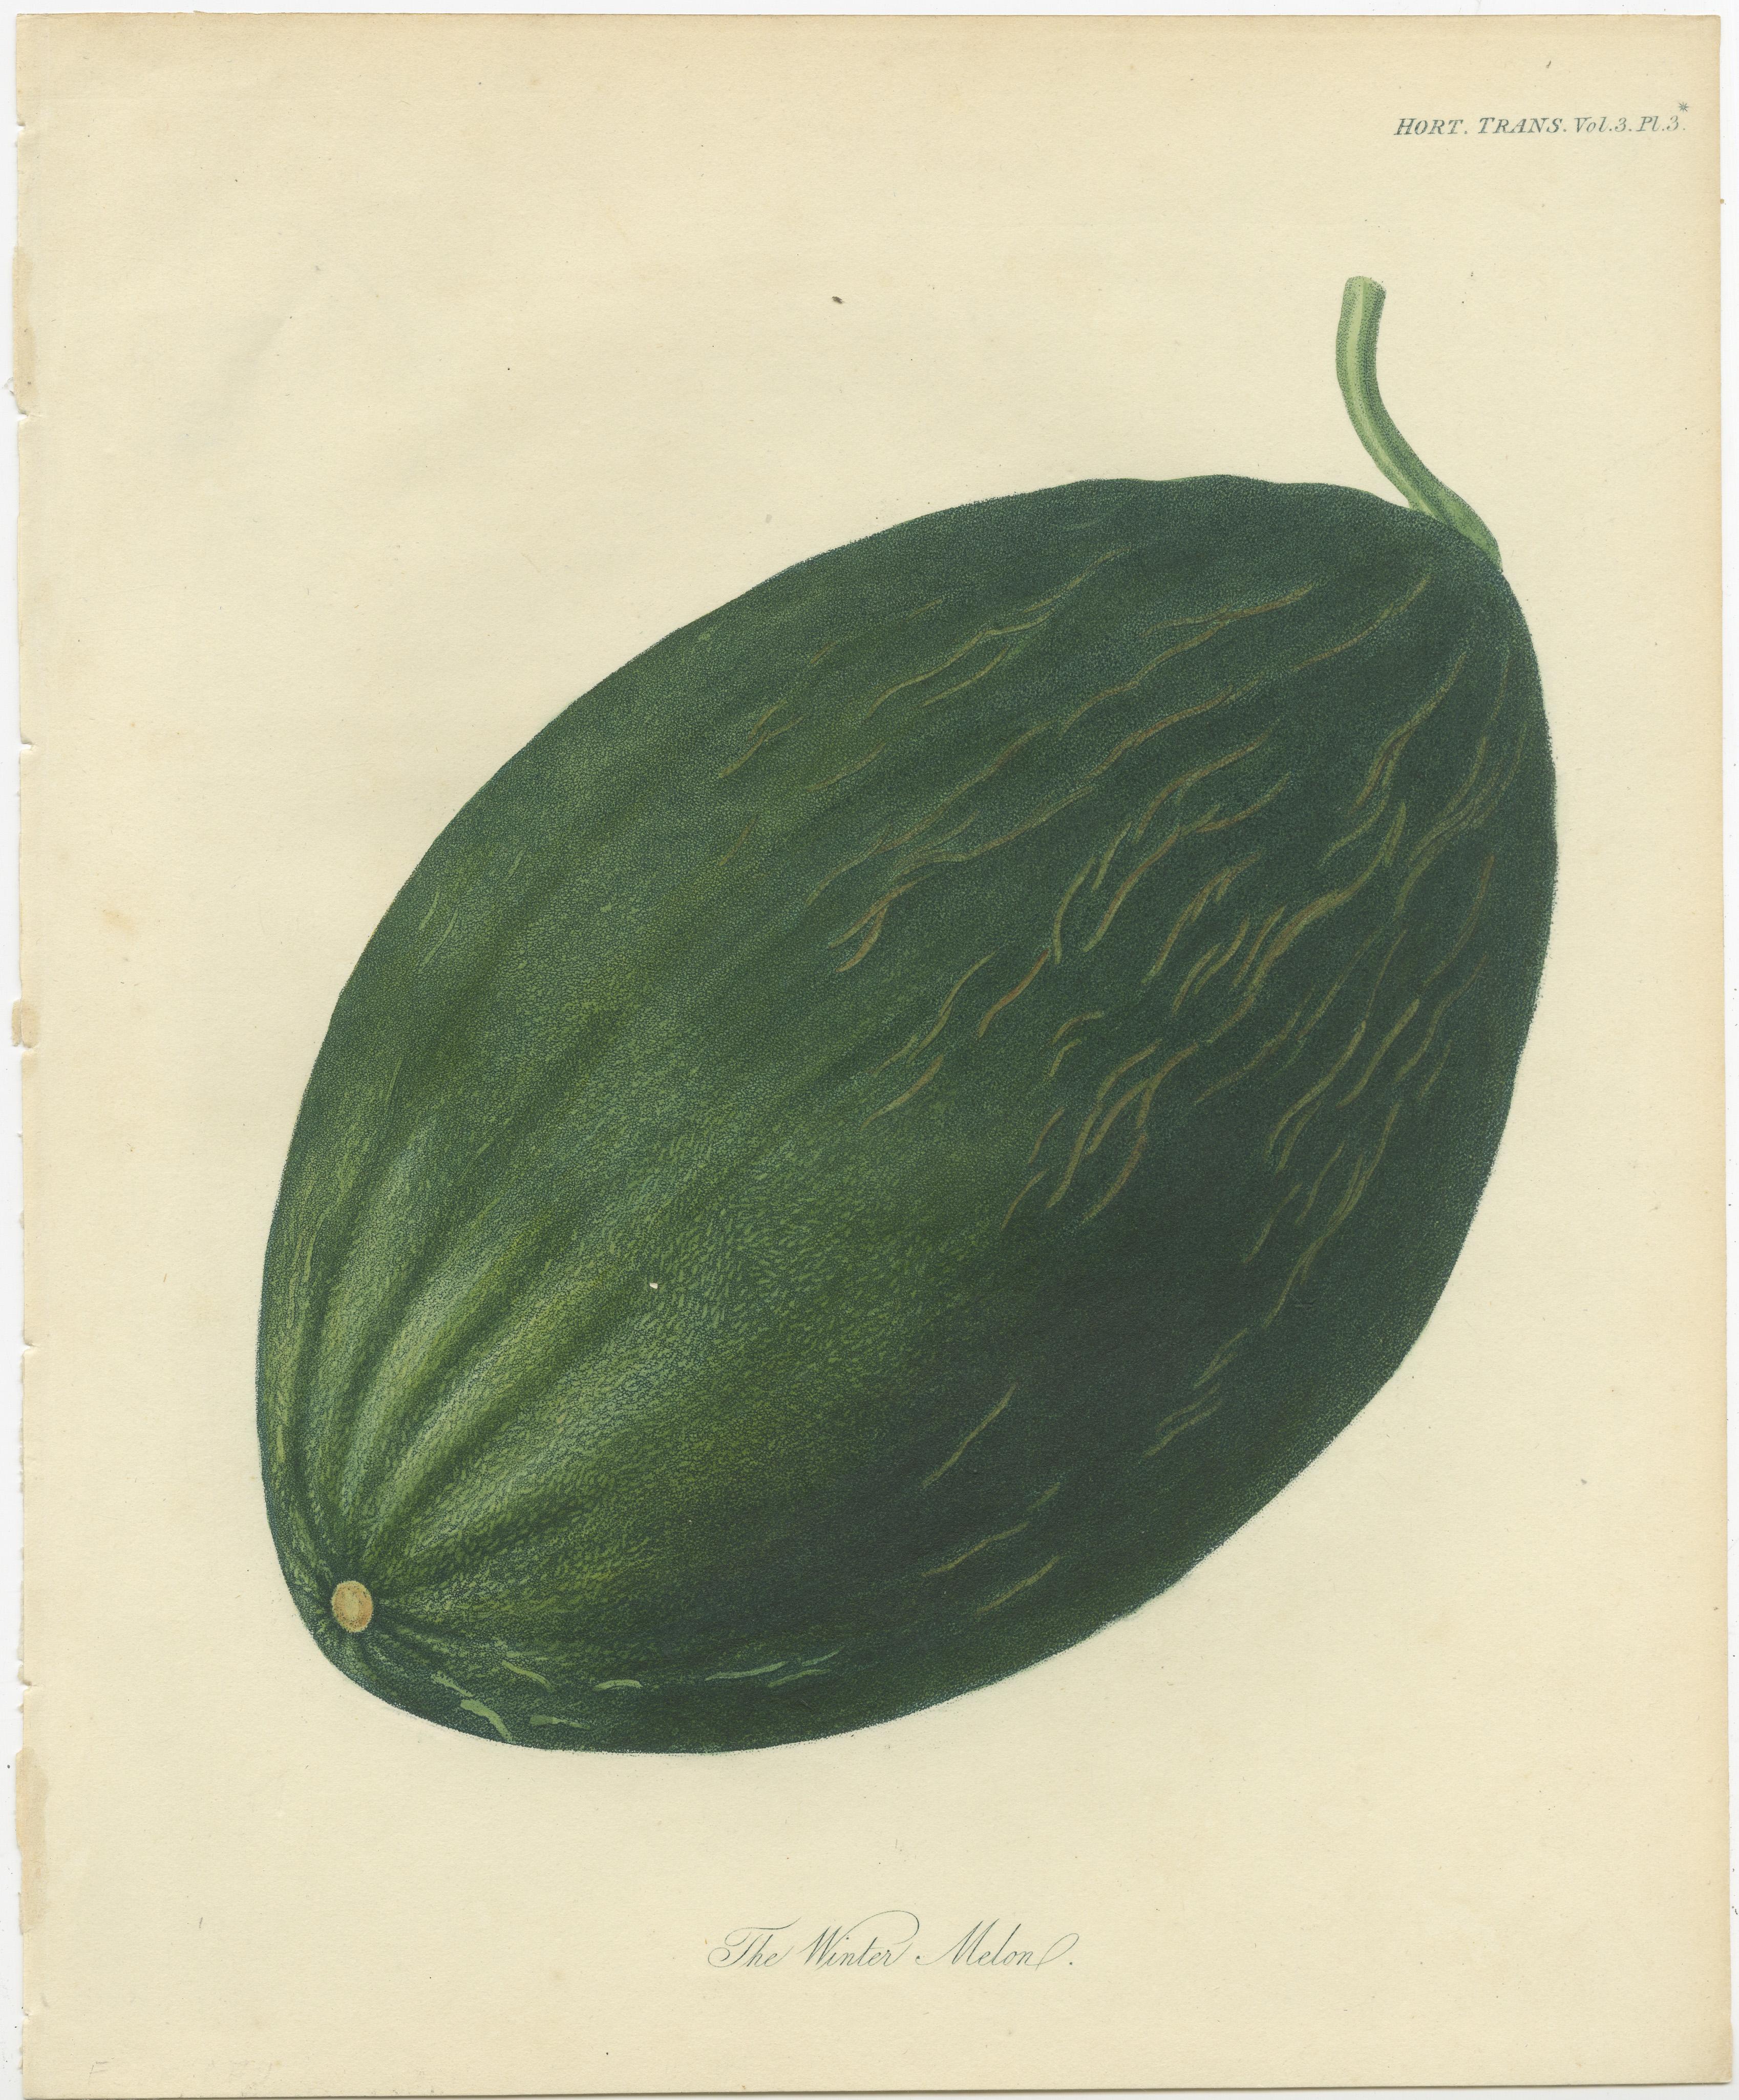 Antique print titled 'The Winter Melon'. This print originates from 'Transactions of the Horticultural Society of London' published circa 1835.

In Transactions of the Horticultural Society of London we find some of the most beautifully illustrated